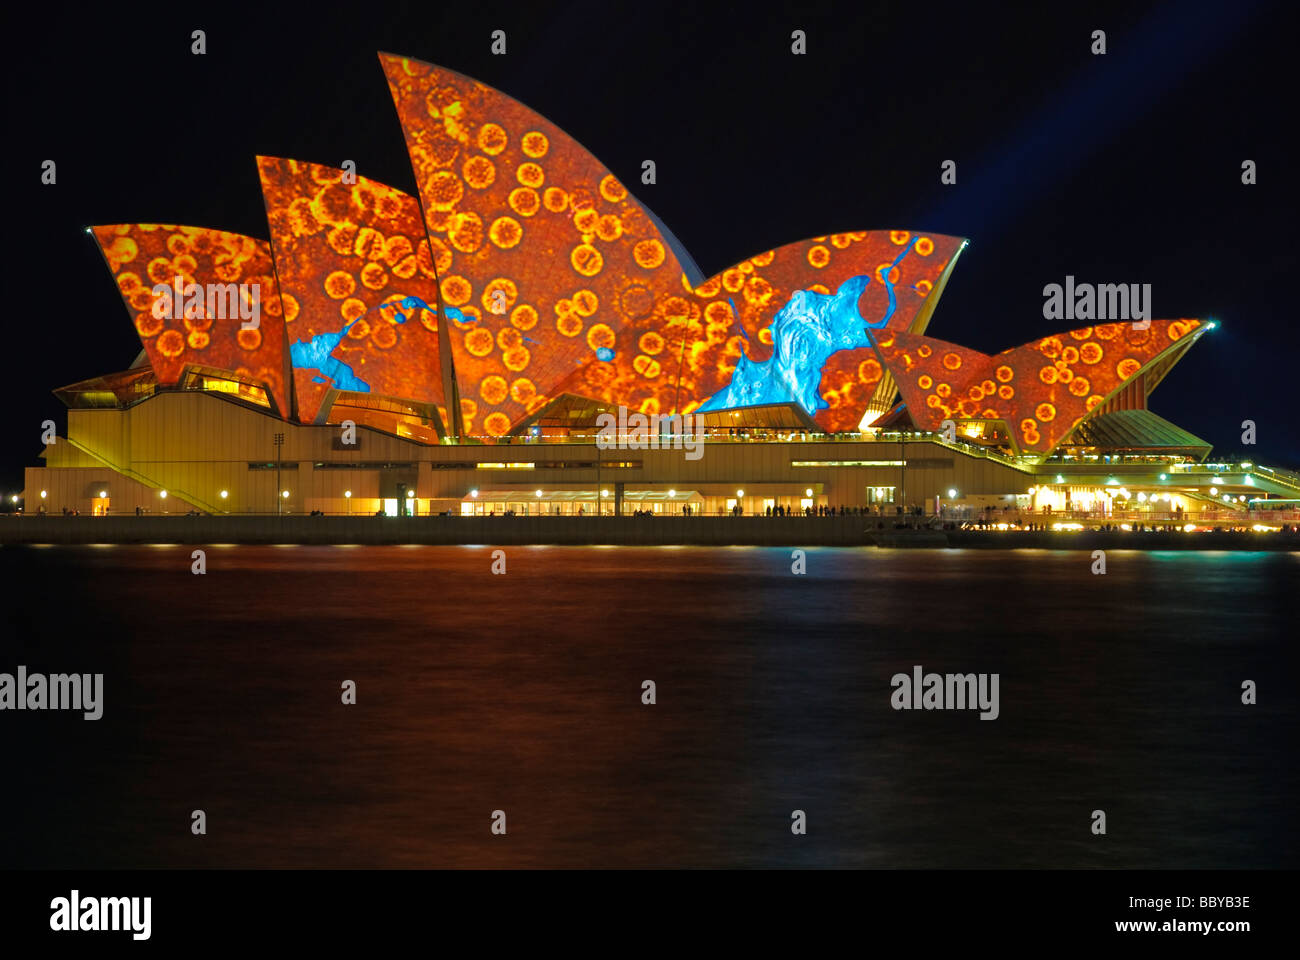 The Sydney Opera House lit up in glorious colour as part of Luminous, part of the Vivid Sydney festival curated by Brian Eno. Australia; Australian Stock Photo